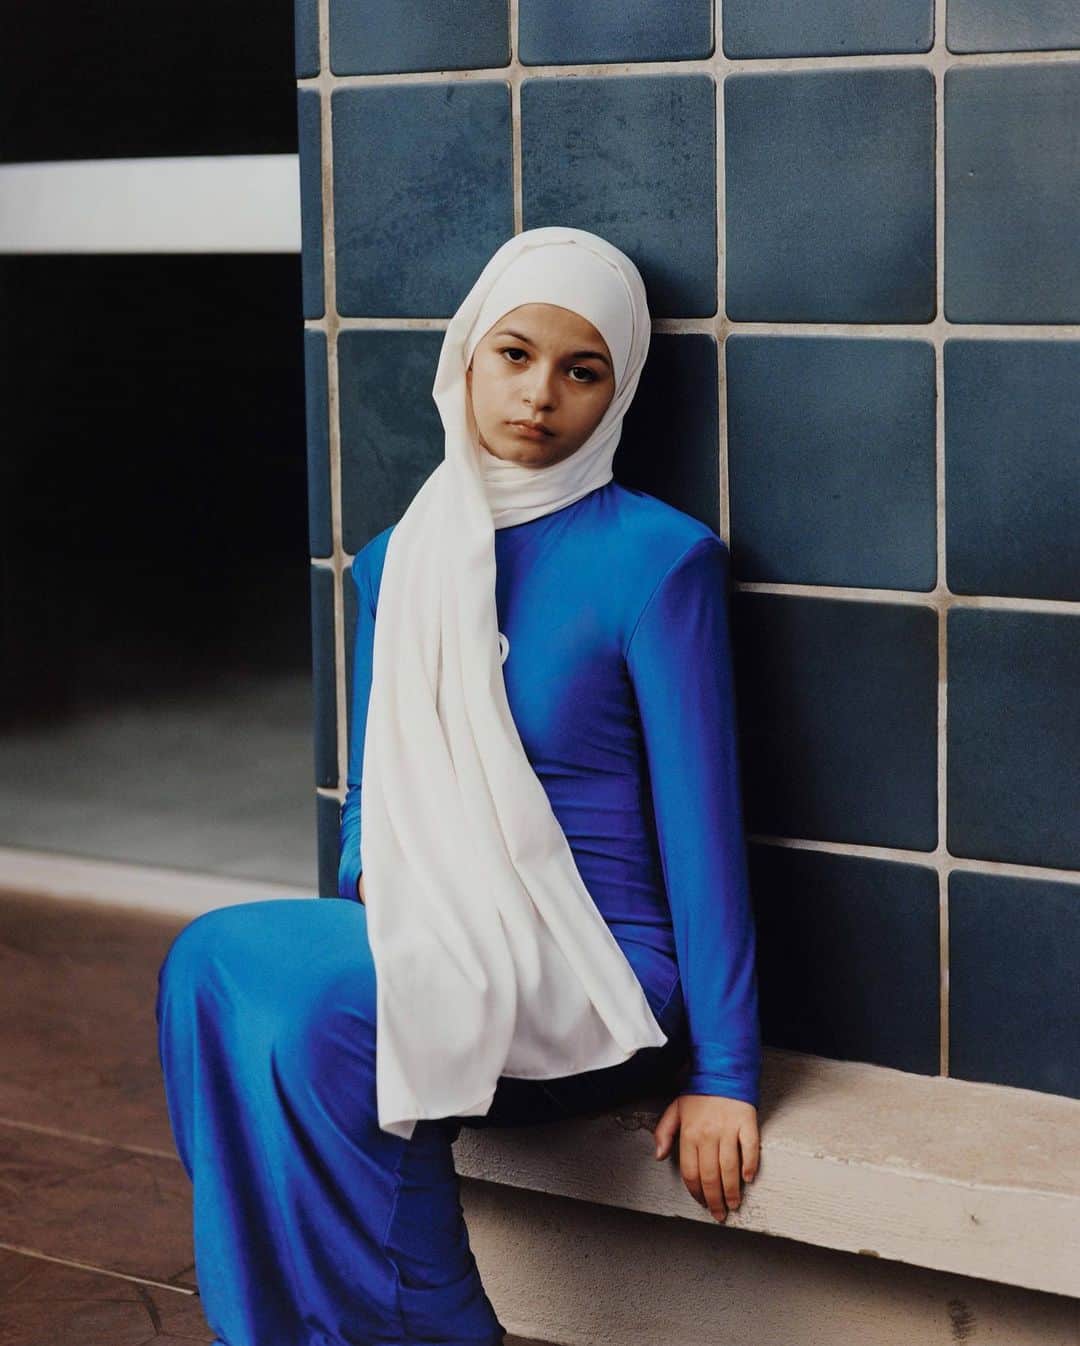 Dazed Magazineさんのインスタグラム写真 - (Dazed MagazineInstagram)「The French state’s efforts to defend women’s rights and prevent ‘separatism’ while further entrenching the ban on the hijab and other religiously affiliated clothing, are entirely self-defeating. All credit is due to the Muslim women and girls who have chosen to stake their own claim to Frenchness 🙌  “The media talks about the hijab all the time. It’s broadcasting news all day, often platforming the extreme right. There’s not a single day you don’t hear about Arabs, Muslims or immigrants on the news. But the media is portraying a version of us that doesn’t exist.” — Salimata Sylla   “We’re still going to fight, we’re not going to let it go. We have more and more girls that join us every day. This is just the beginning.”   Tap the link in bio to explore more 🔗  Featuring Founé Diawara, Hawa Doucouré, and Yousra of @leshijabeuses, Salimata Sylla @sali_7, Loubna Reguig loubnarchives, Ania Khelaf @ania.tayri, Sarah B @saraahh.bni, Hiba Latreche @hibalat  Photography @gunsahma Styling @omaimasss Hair @oummy_youssoufa Make-up @minkimmakeup Production @wagmbh Post Production @_thehandofgod  Text @tiara.sahar  Editor-in-Chief @ibkamara Art Director @gareth_wrighton Editorial Director @kaci0n Fashion Director @imruh  1. Ania wears gabardine dress and leather pumps @prada, cotton bodysuit worn underneath @wolford. 2. From left: Salimata wears technical moiré coat @dior, cotton bodysuit worn underneath @wolford. Loubna wears all clothes @maisonalaia. Hiba wears scuba and silk dress @gucci, hooded top worn underneath @marineserre_official. 3. Founé wears technical silk dress @balenciaga. 4. Sarah wears spandex dress @maisonjsimone. 5. Hawa wears silk top @ysl by @anthonyvaccarello. 6. From left: Hawa wears all clothes @ysl by @anthonyvaccarello. Founé wears technical silk dress, spandex panta-boots @balenciaga. Yousra wears recycled polyester dress @cfcl_official, cotton bodysuit worn underneath @wolford, wool pleated Burça @burcakyol. 7. Founé wears technical silk dress @balenciaga. 8. Hawa wears all clothes @ysl by @anthonyvaccarello. 9. Hiba wears hooded top @marineserre_official.  Taken from the winter 2023 #THEBADDIEISSUE of #Dazed」11月29日 22時04分 - dazed